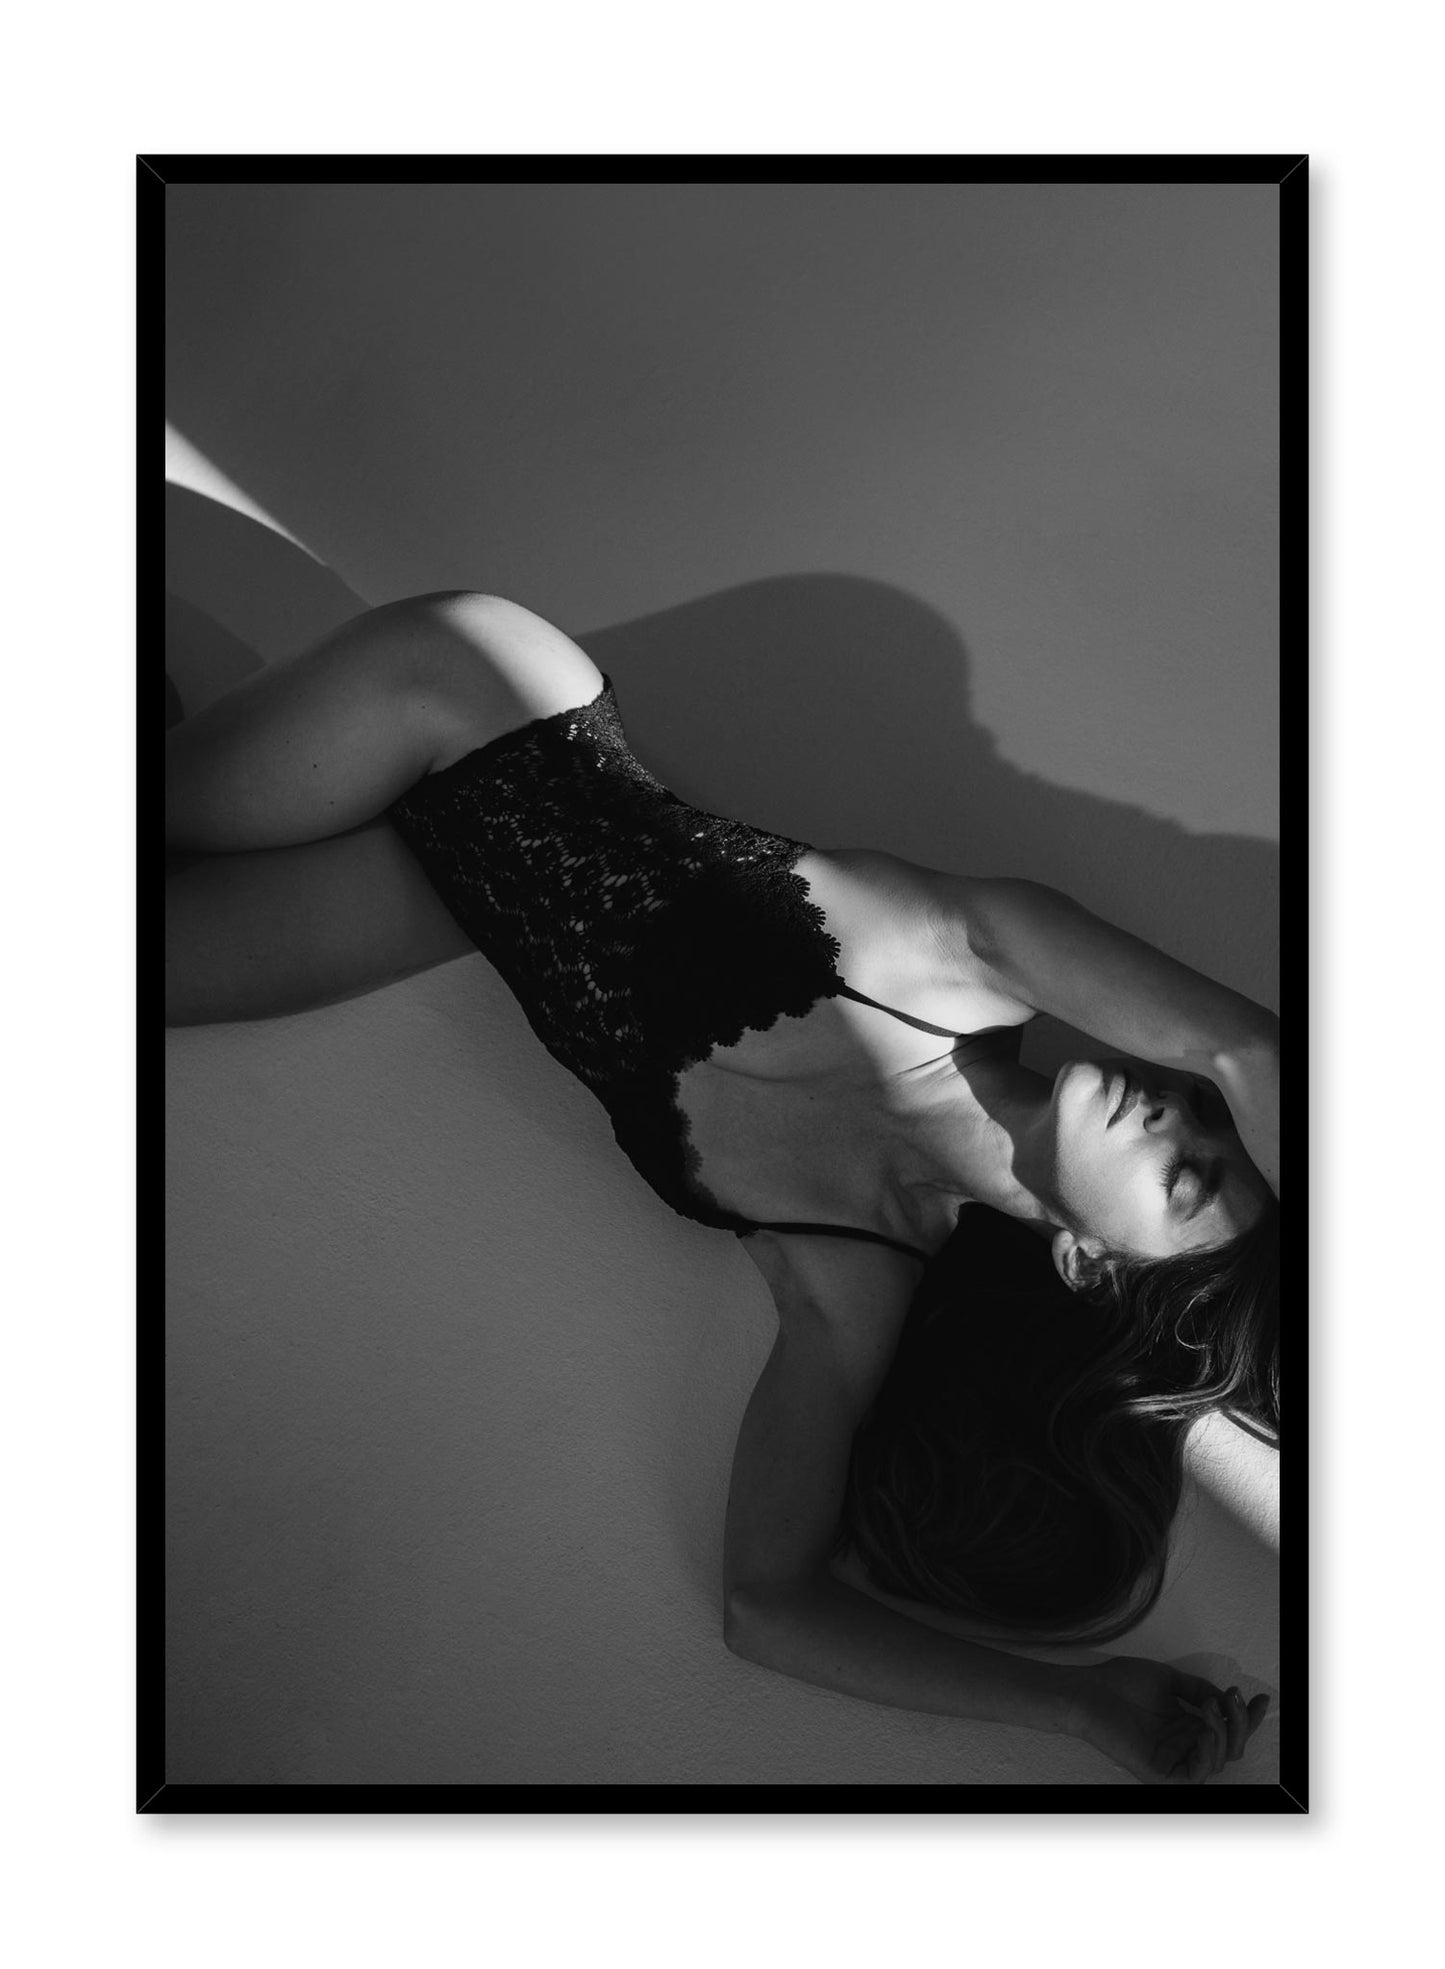 Black and white fashion photography poster by Opposite Wall with woman laying in lingerie